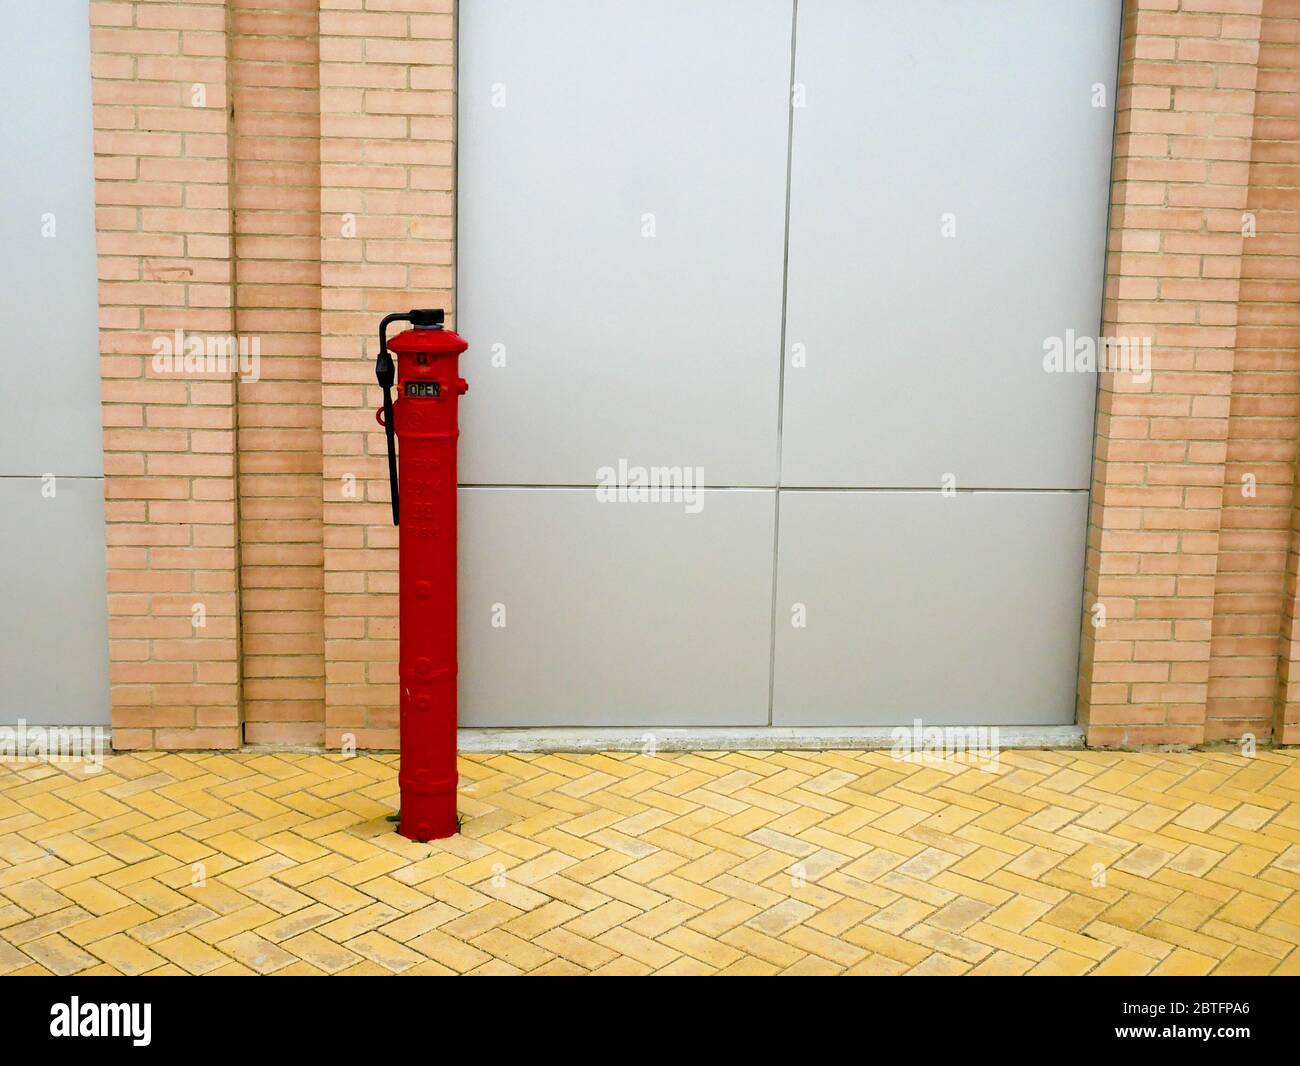 Bello, Colombia, December 17 2019: post indicator valve for fire protection system in a waste water treatment plant in Bello, colombia Stock Photo